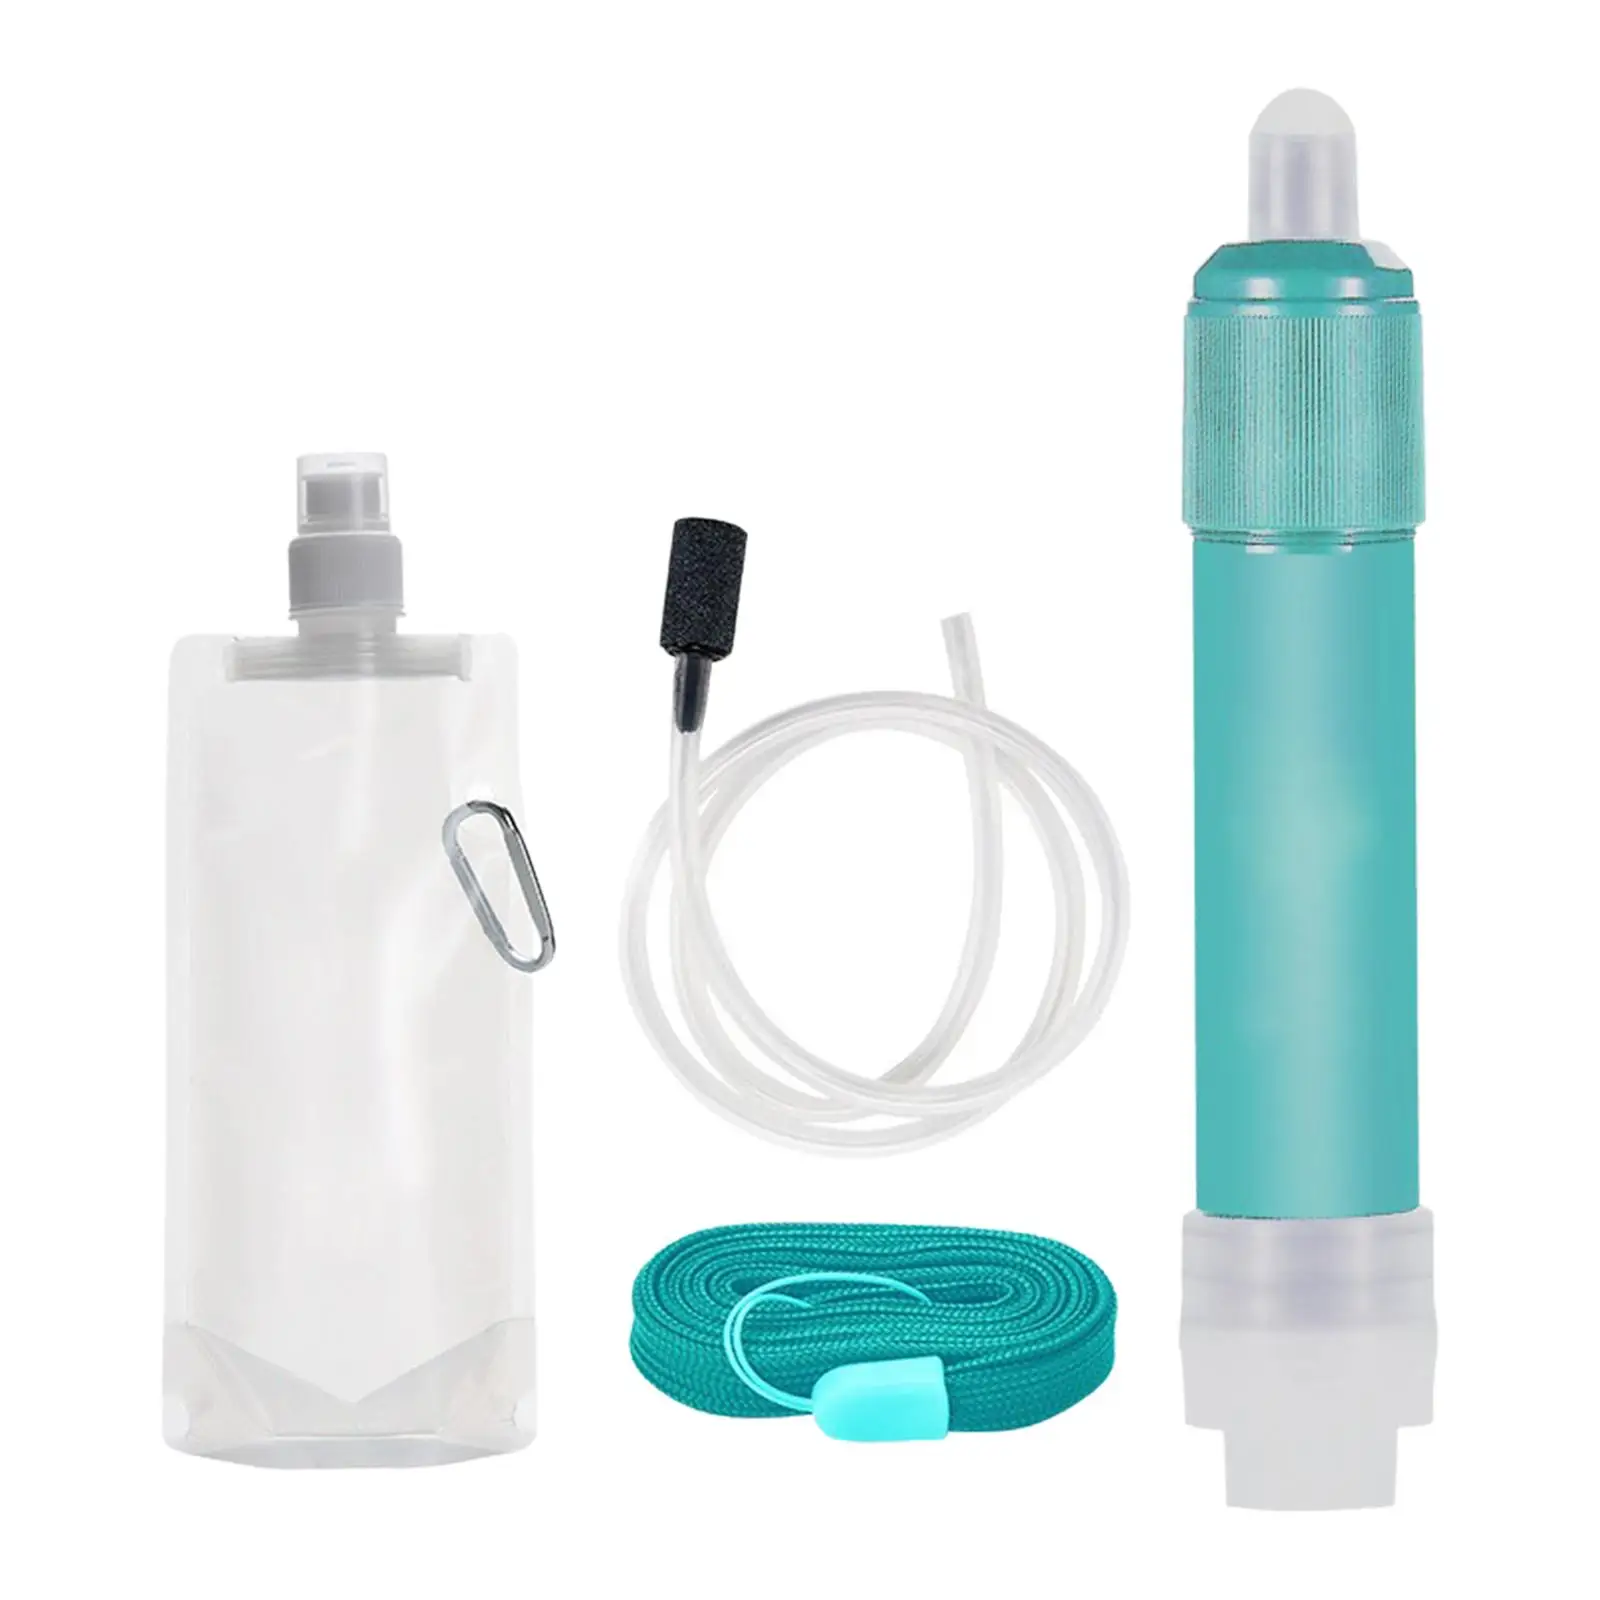 Personal Survival Straw Water Filter Filtration Gear 4000L Equipment System for Team Family Outing Travel